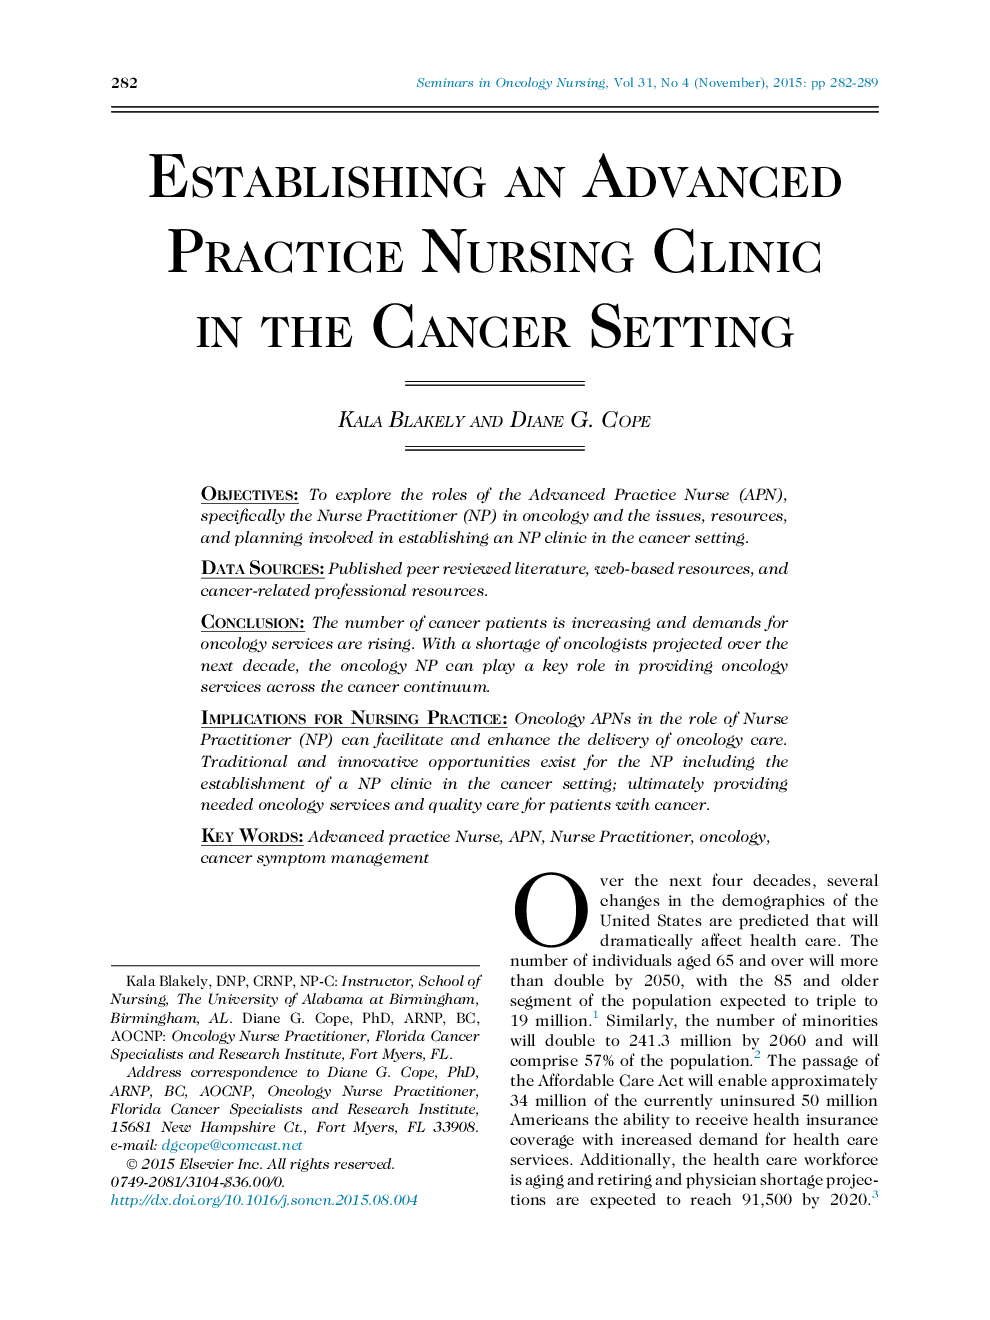 Establishing an Advanced Practice Nursing Clinic in the Cancer Setting